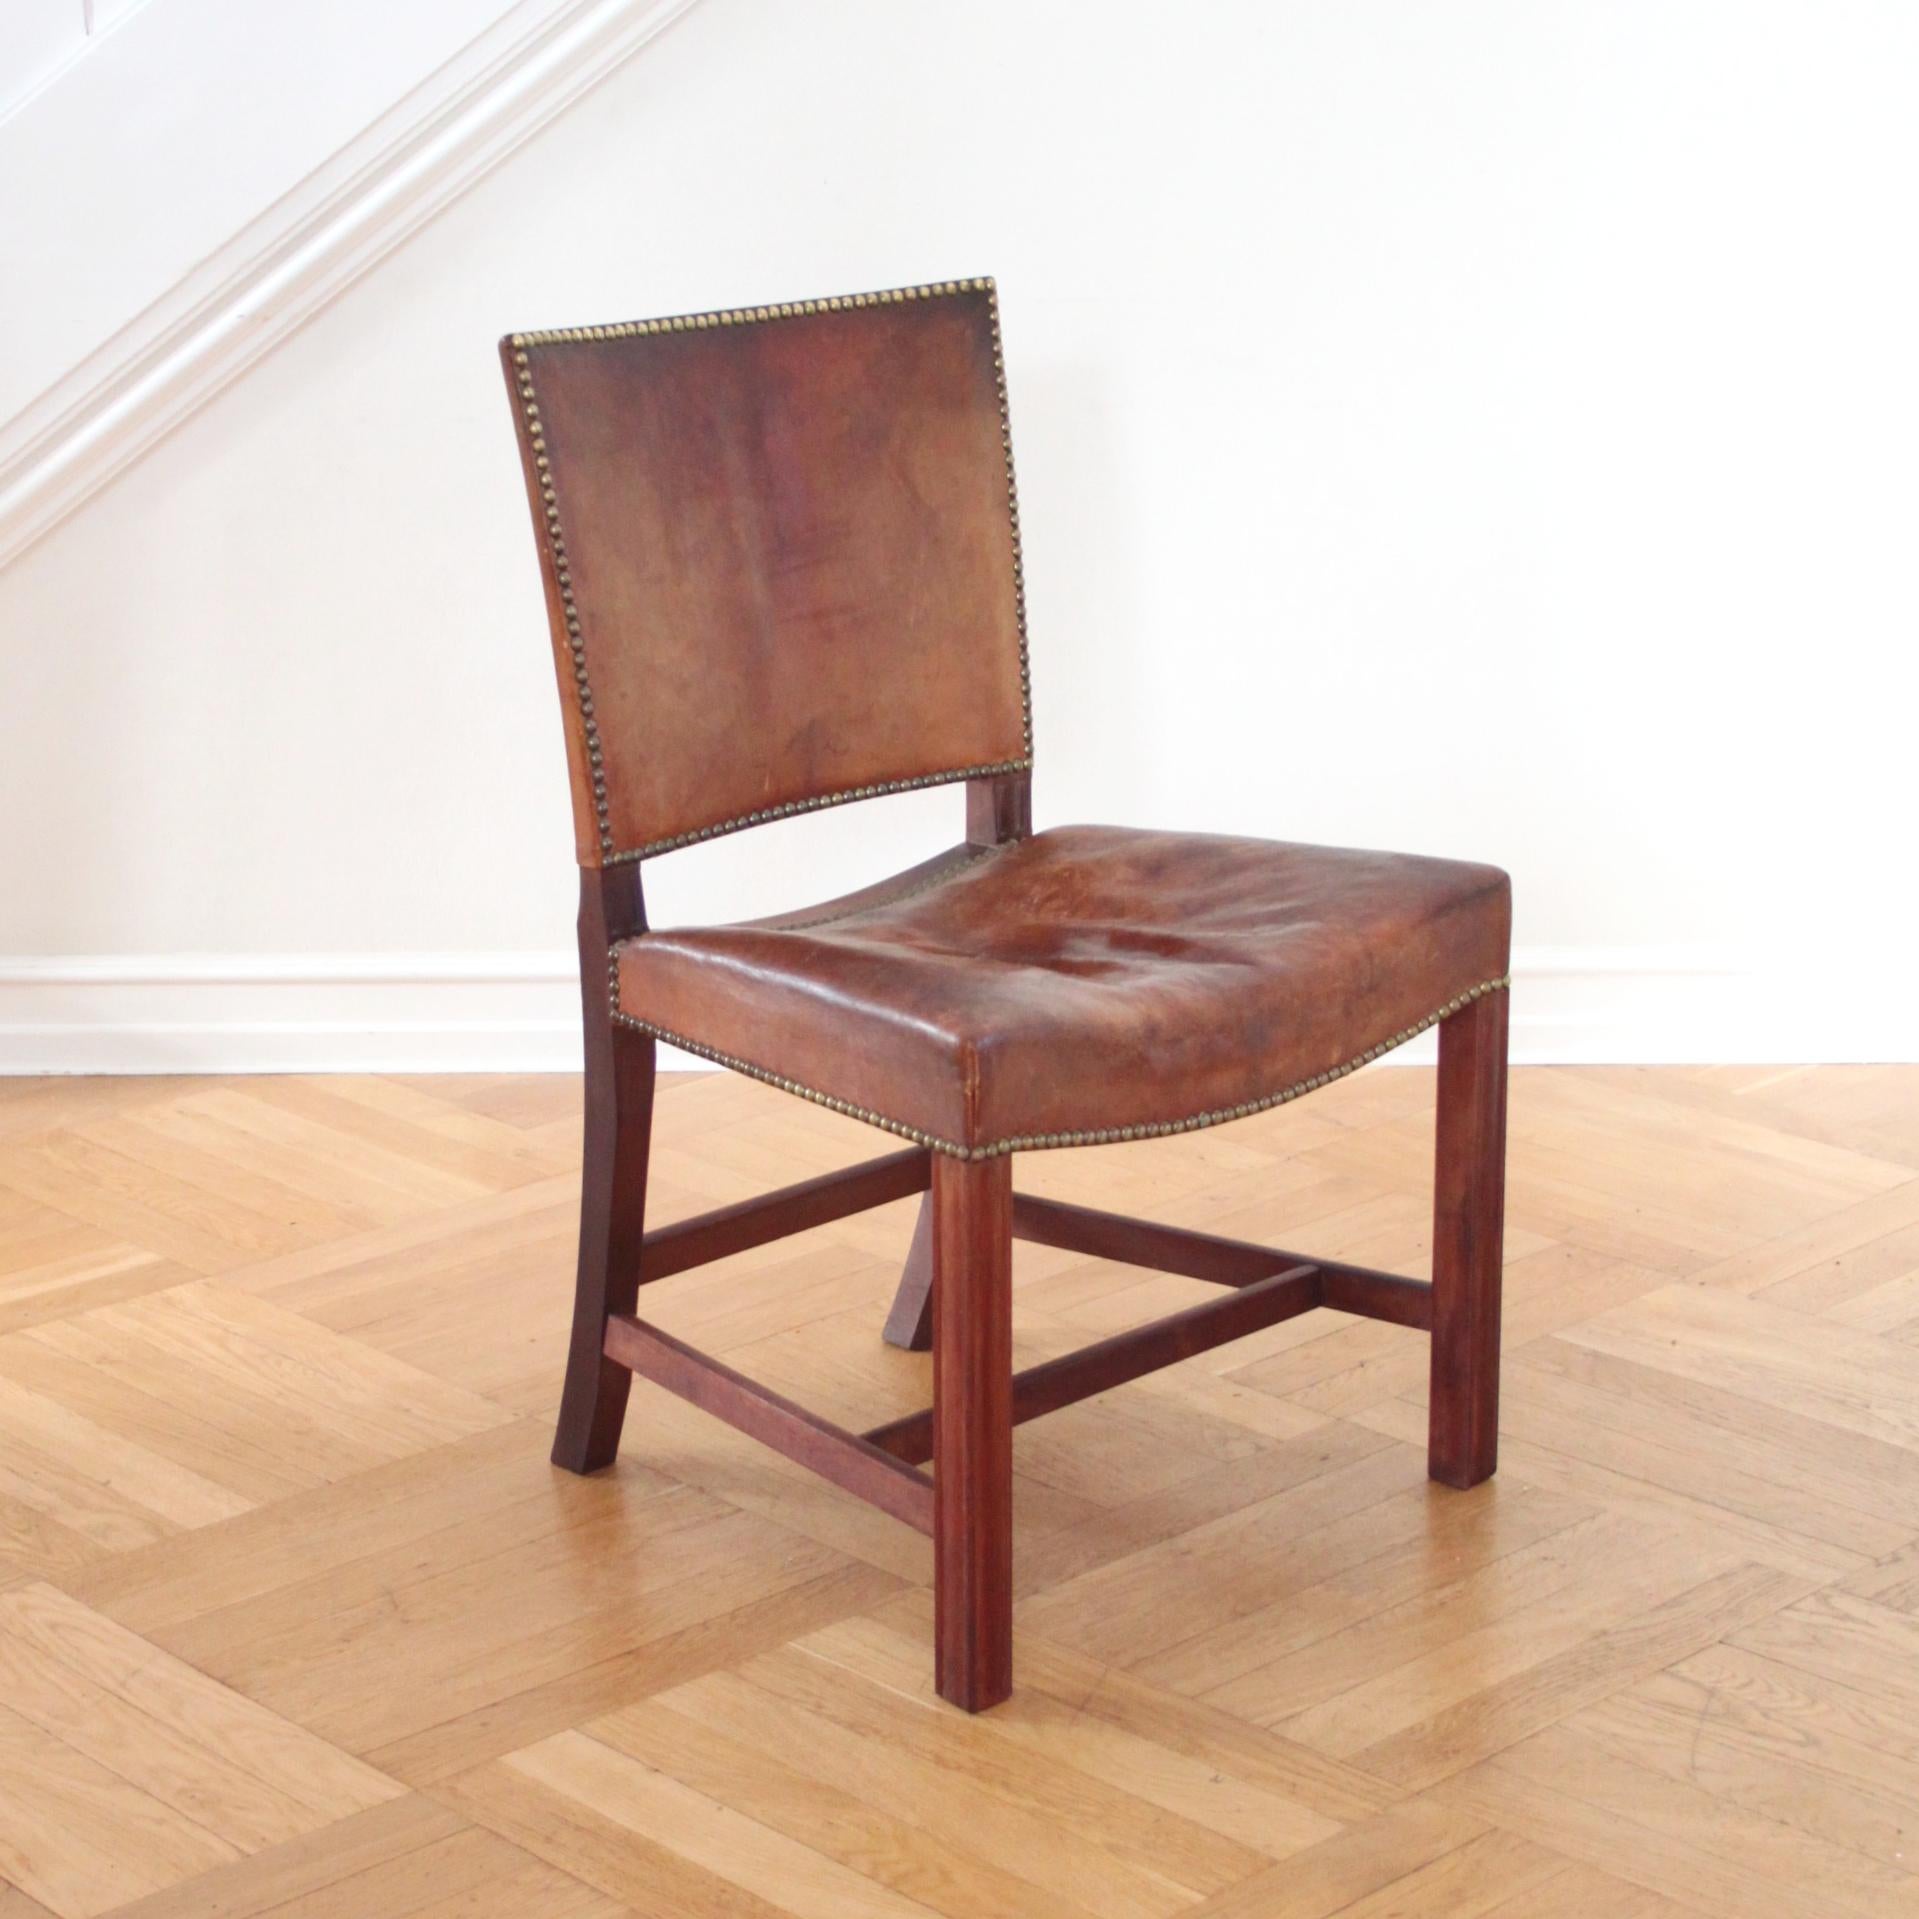 Oiled Kaare Klint Red Chair, Rud Rasmussen, Original Niger Leather and Mahogany frame For Sale